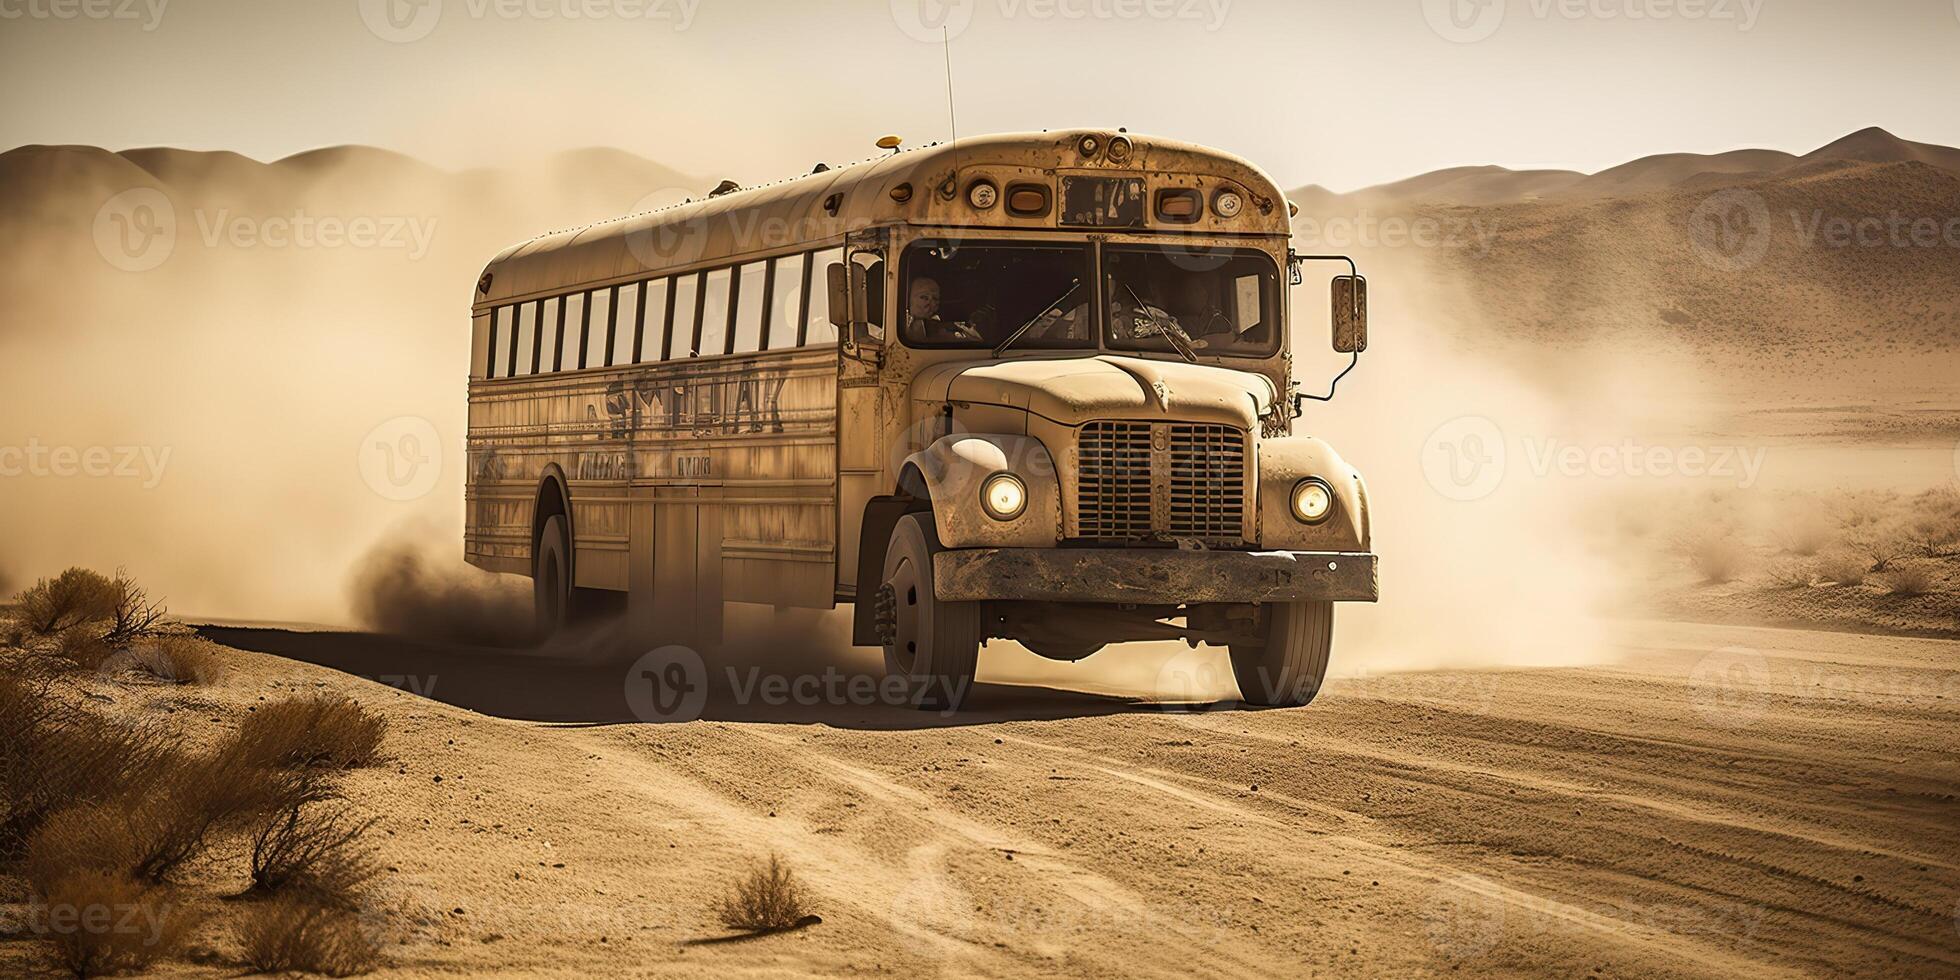 . . Photo realistic illustration of bus riding in the desrt on the road. Mad Max movie inspired. Graphic Art